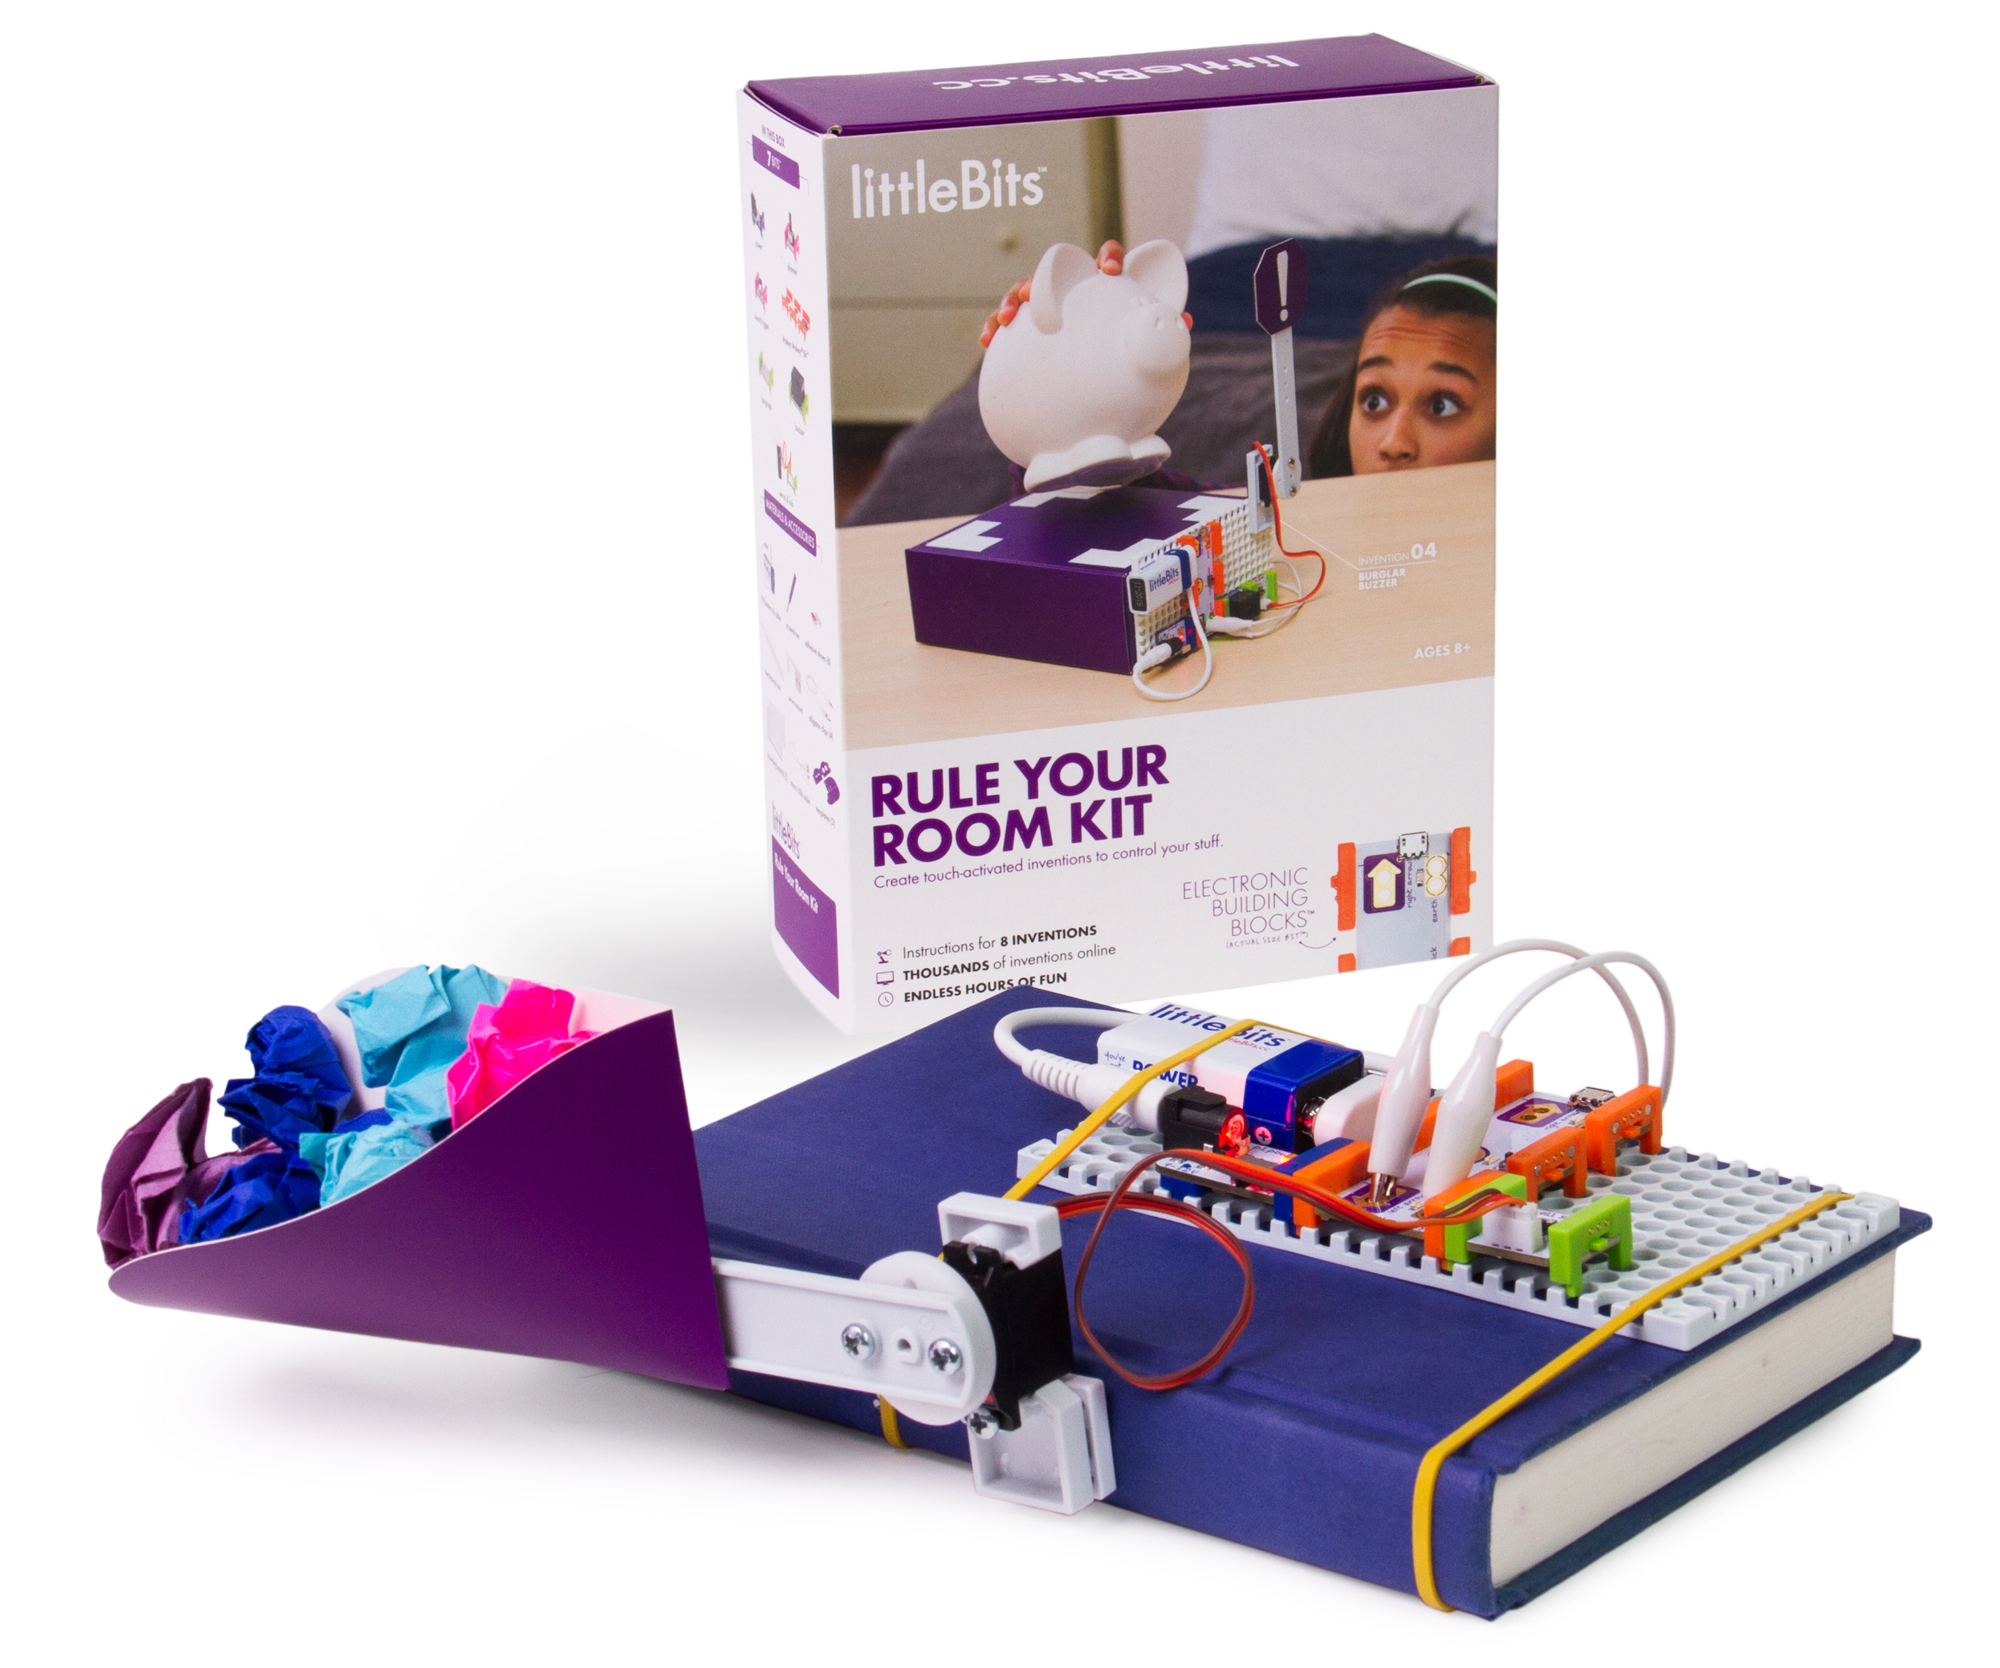 This LittleBits Kit Lets Kids Boobytrap Their Room